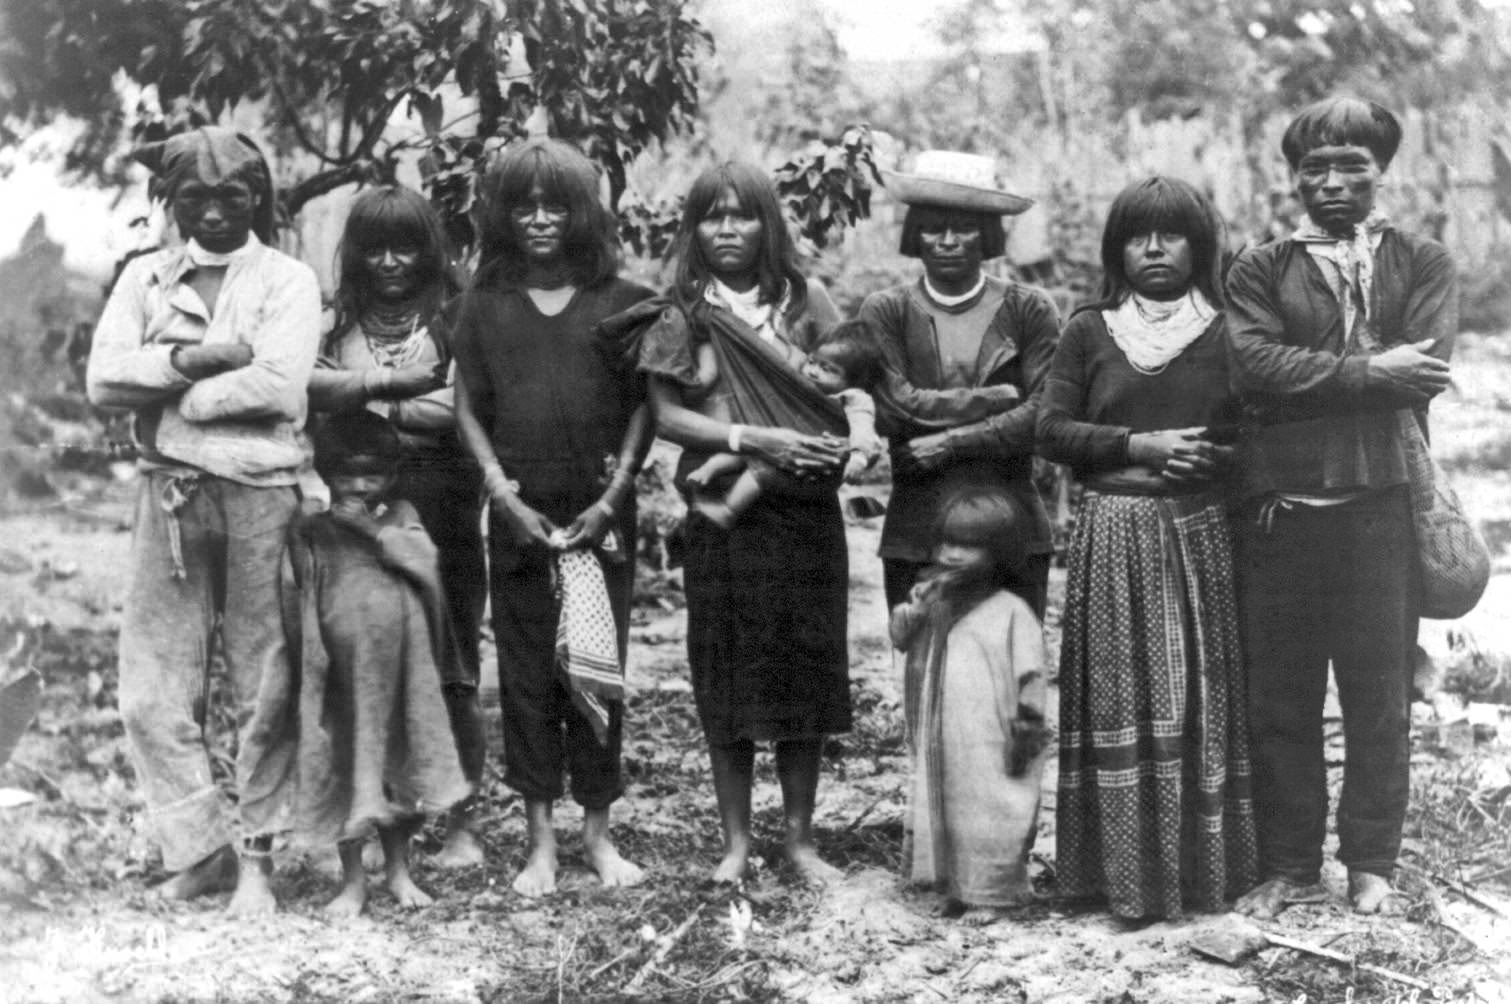 Native South American Indians pose for a picture with clothes given to them by the government somewhere in Brazil in 1922. Brazil had major plans to civilize the native population, and by any means necessary. This became very important as more discoveries of gold, silver, and other natural resources would be discovered on tribal lands. The Brazilian government forced the natives to move, integrate, and adapt, and if they did not, in some cases, violence would occur. This practice is sadly still technically ongoing, and certain tribes are still fighting against the Brazilian government on various things almost all relating to their claim of ownership of their own lands.